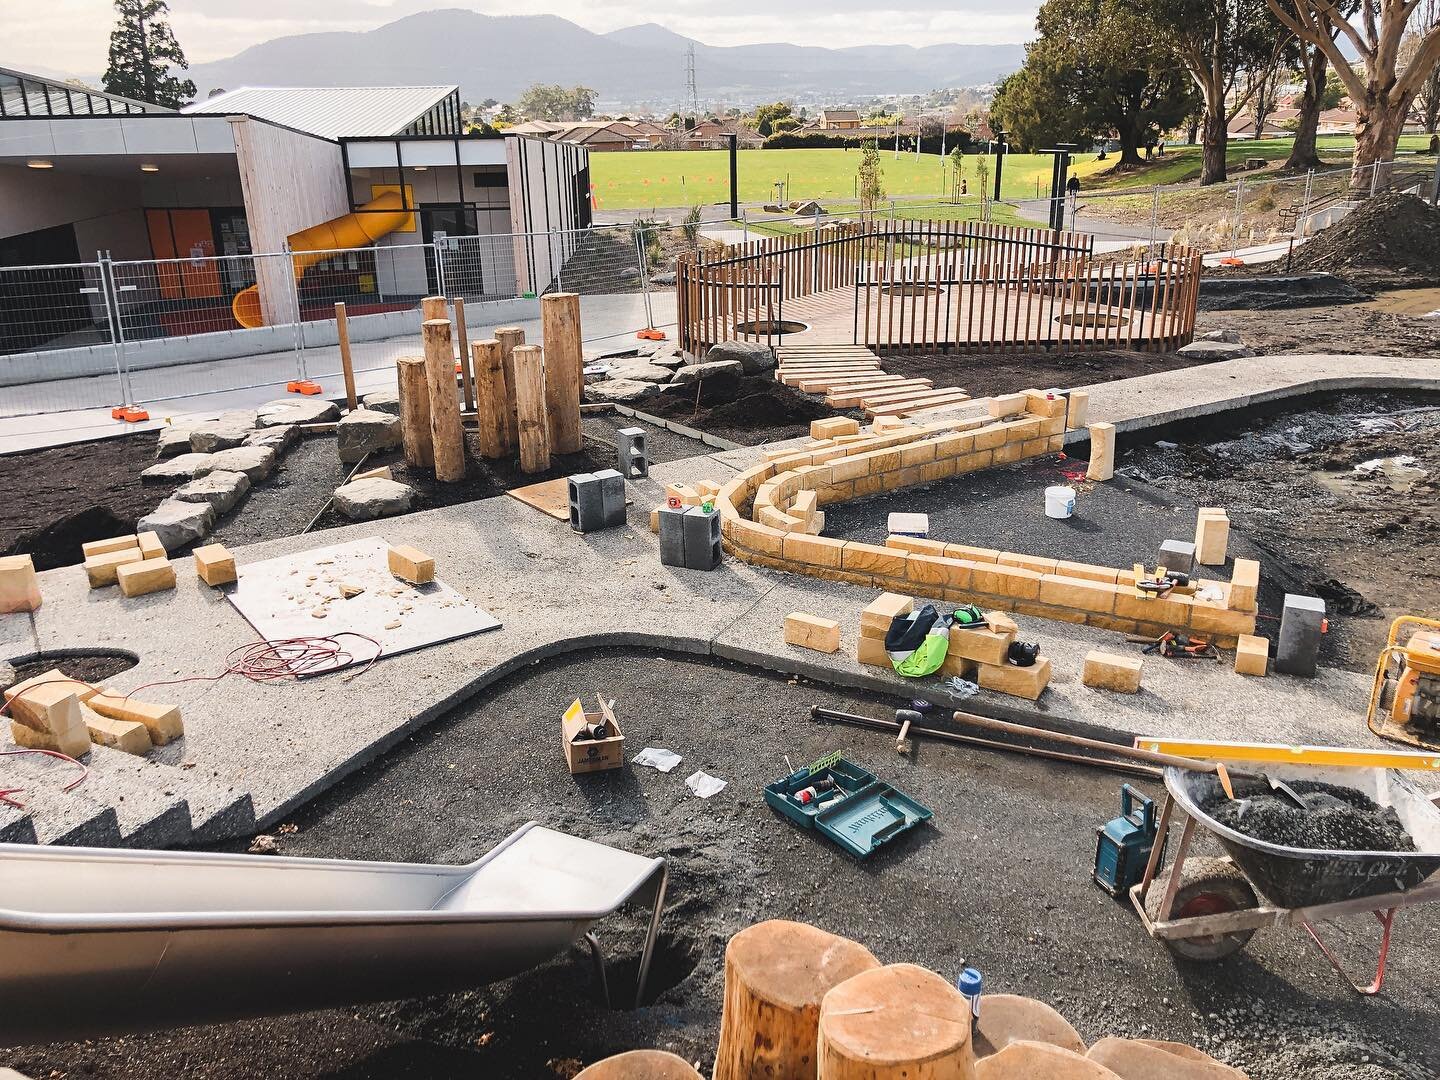 Another sneak peak of the progress at our Dominic College play space 👀 #landscapearchitecture #landscapearchitectureaustralia #playspace #playground #natureplay #dominiccollege